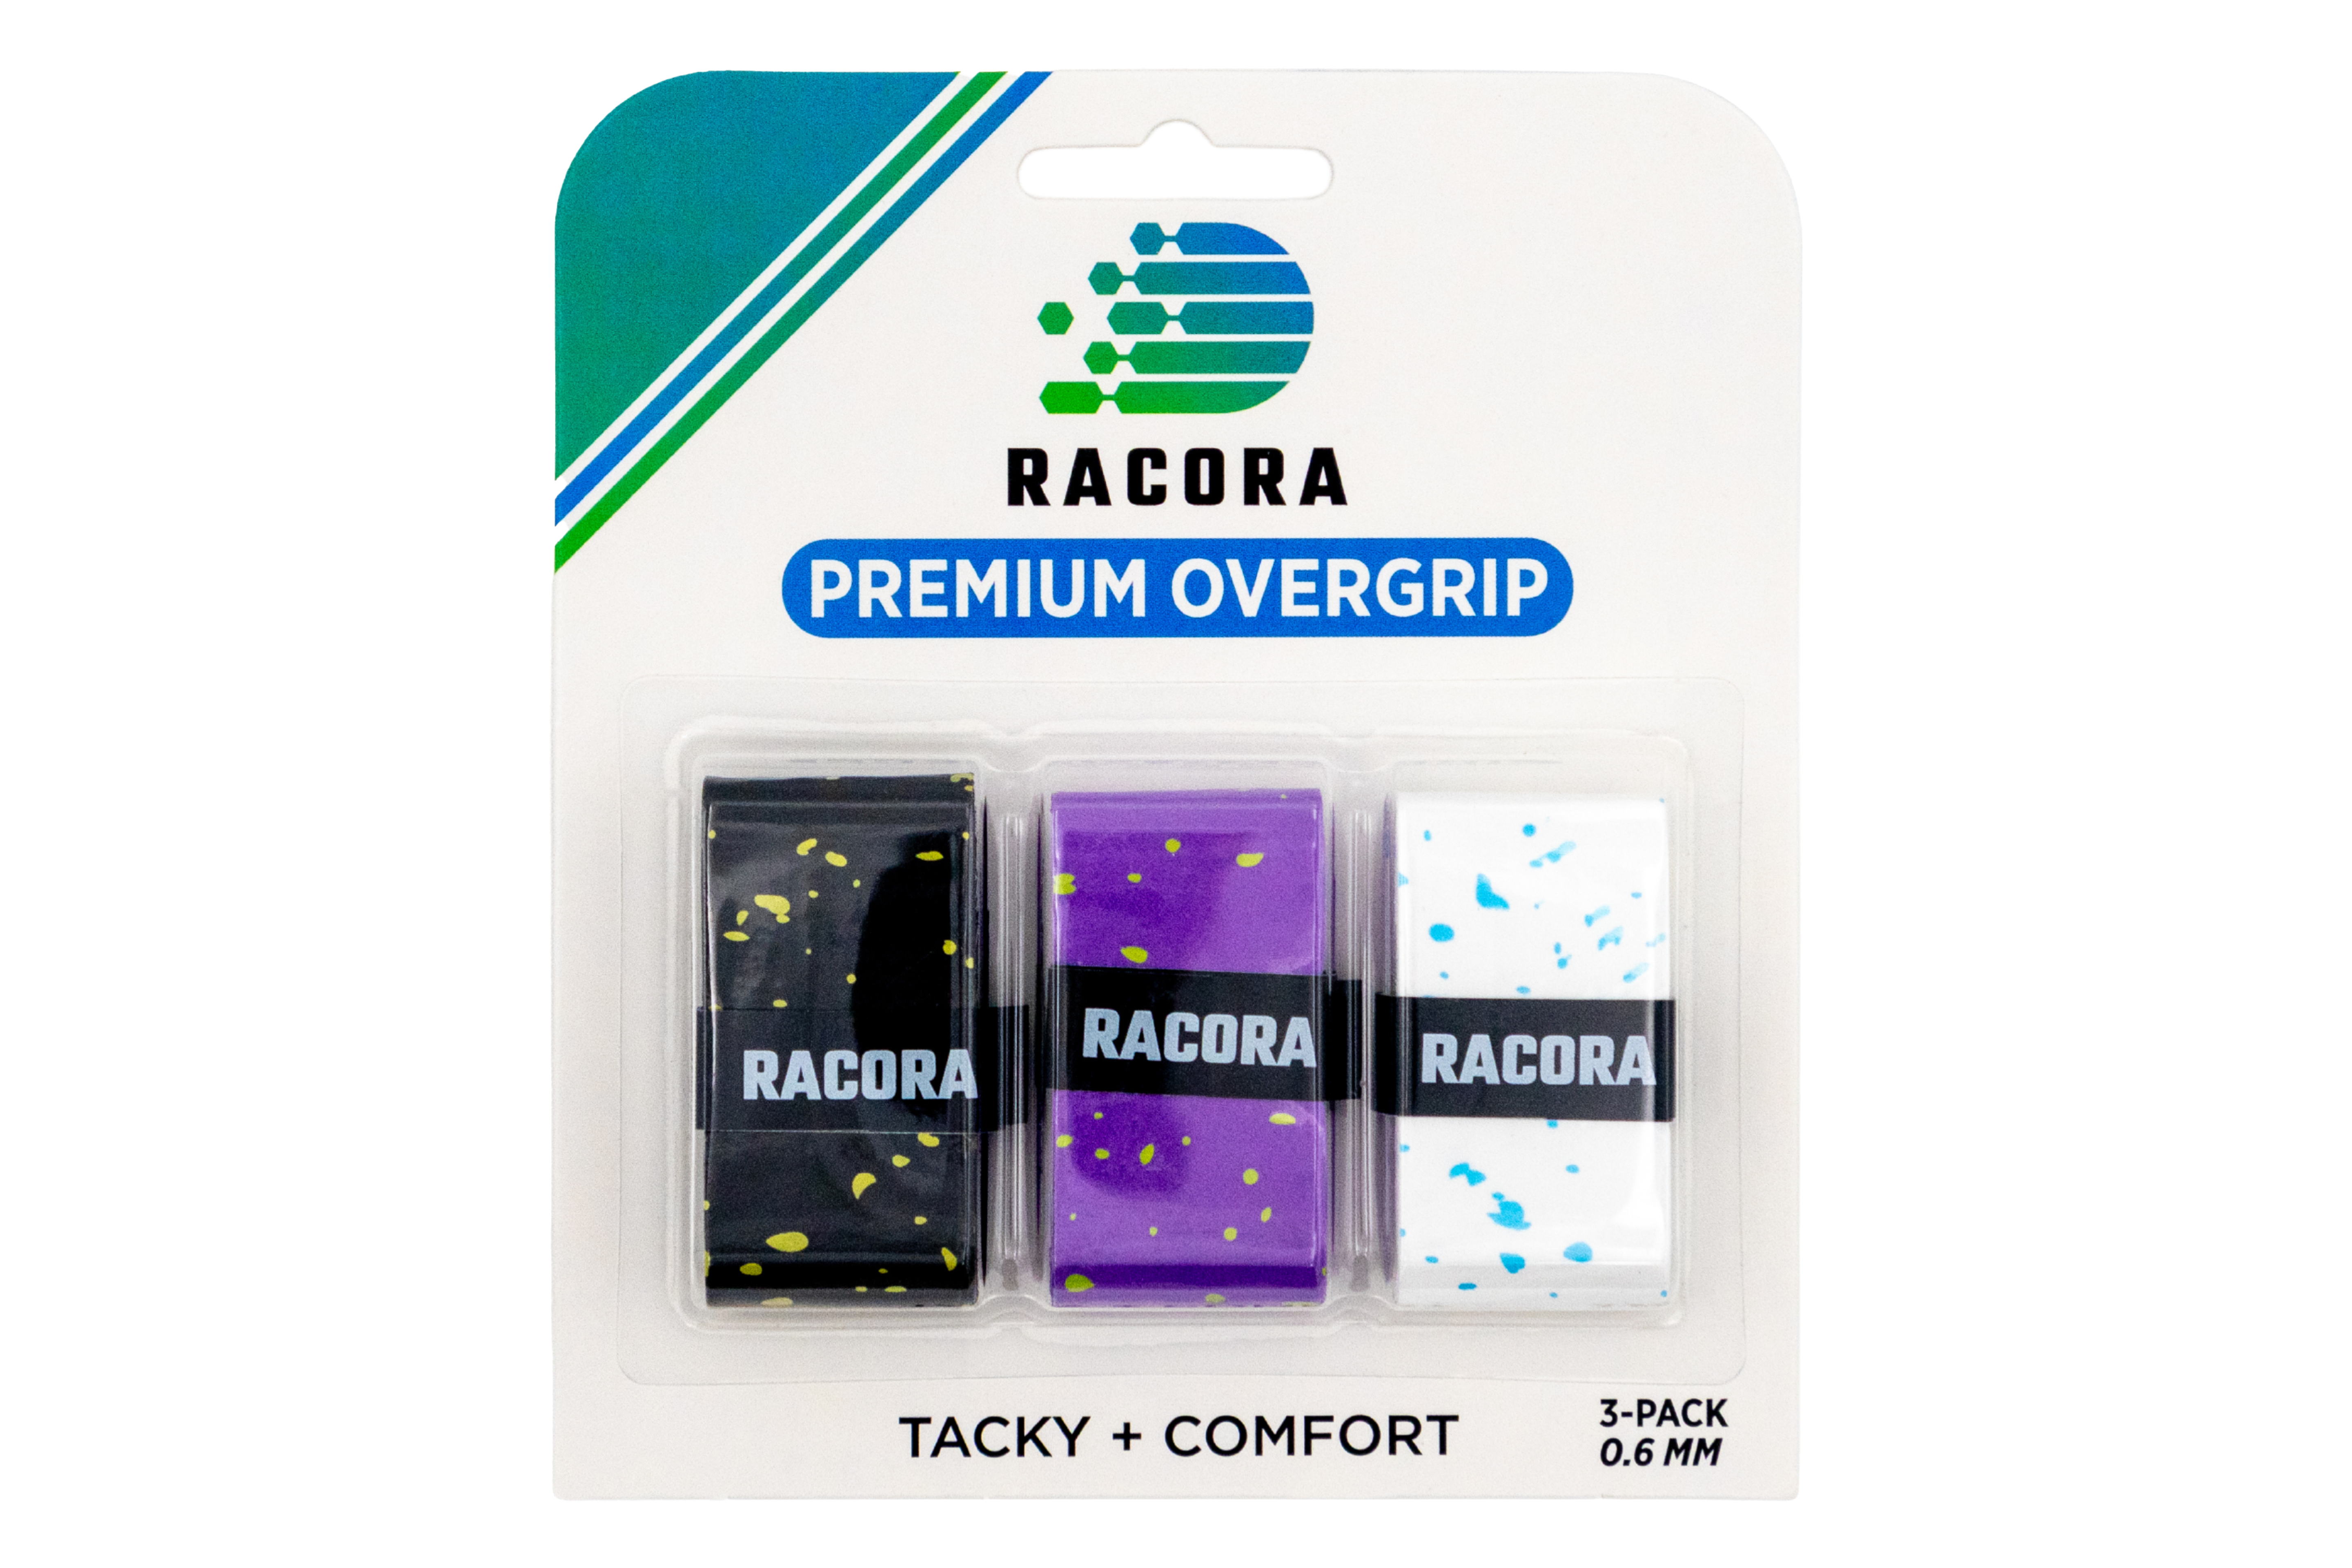 3-Pack of Racora speckled tennis overgrips in package